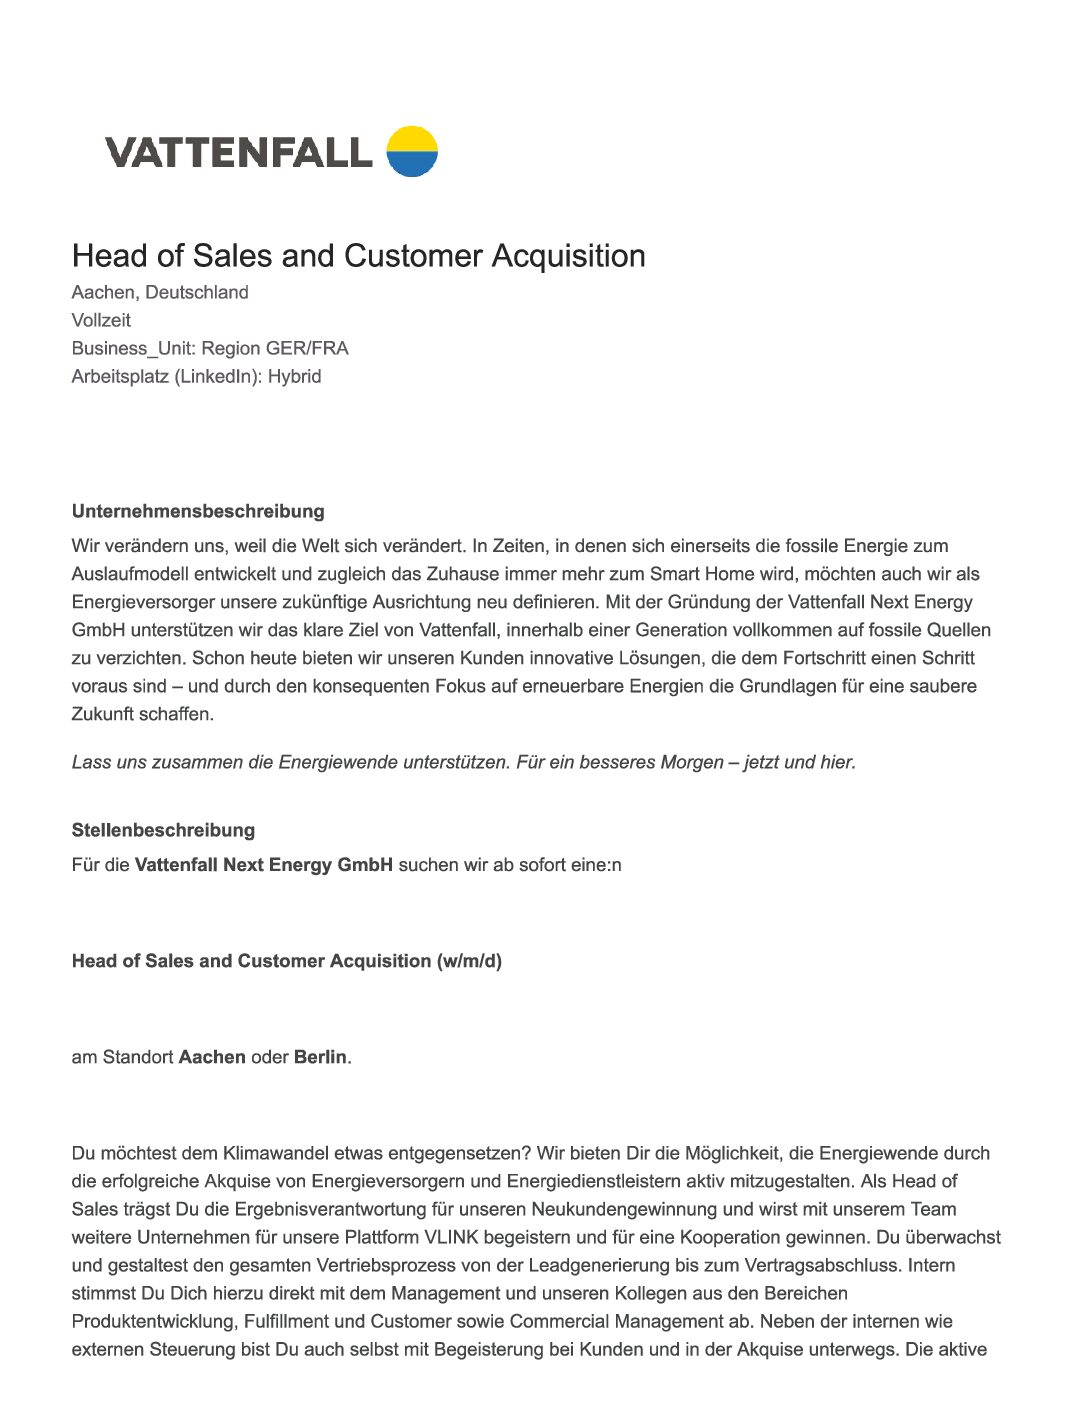 Vattenfall_Head-of-Sales-and-Customer-Acquisition-4-pdf  